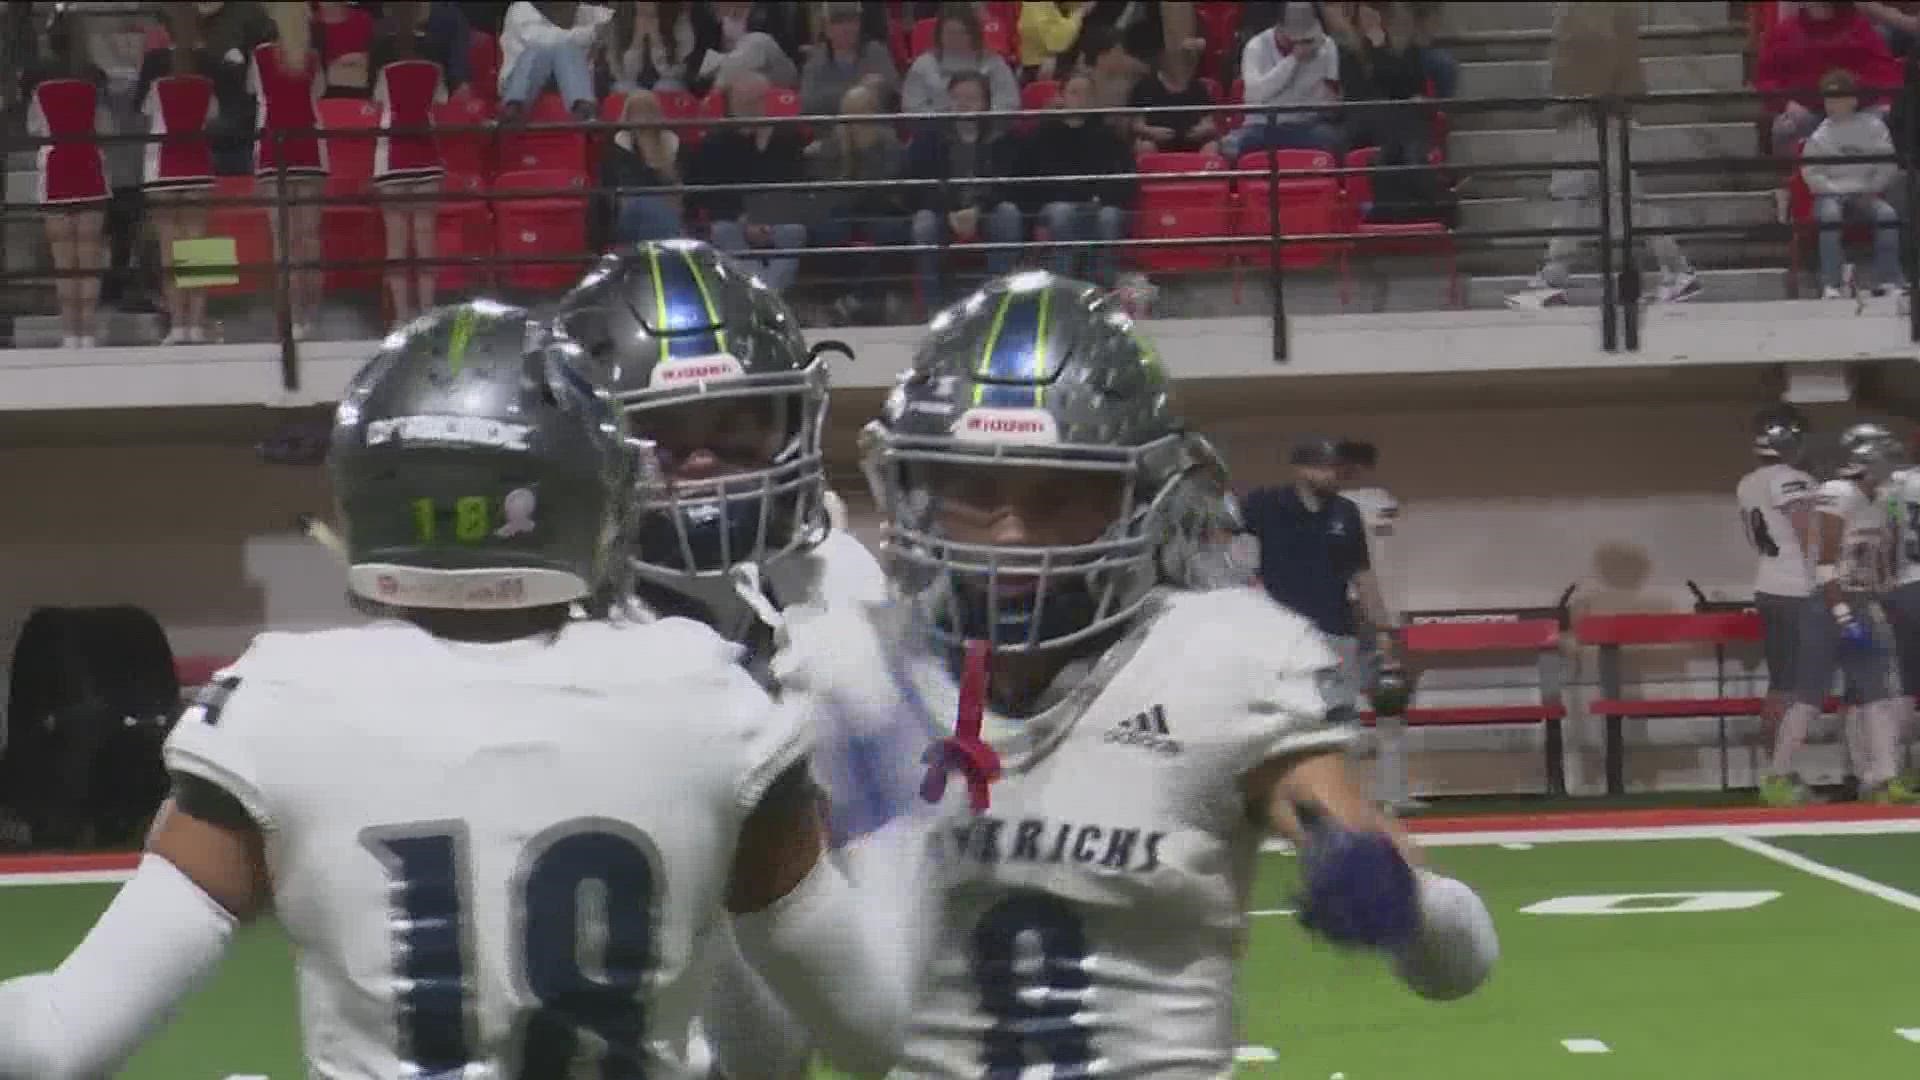 Mountain View advanced to the 5A state semifinals with a huge 30-24 victory over the Highland Rams Friday. The Mavericks visit Meridian next week.